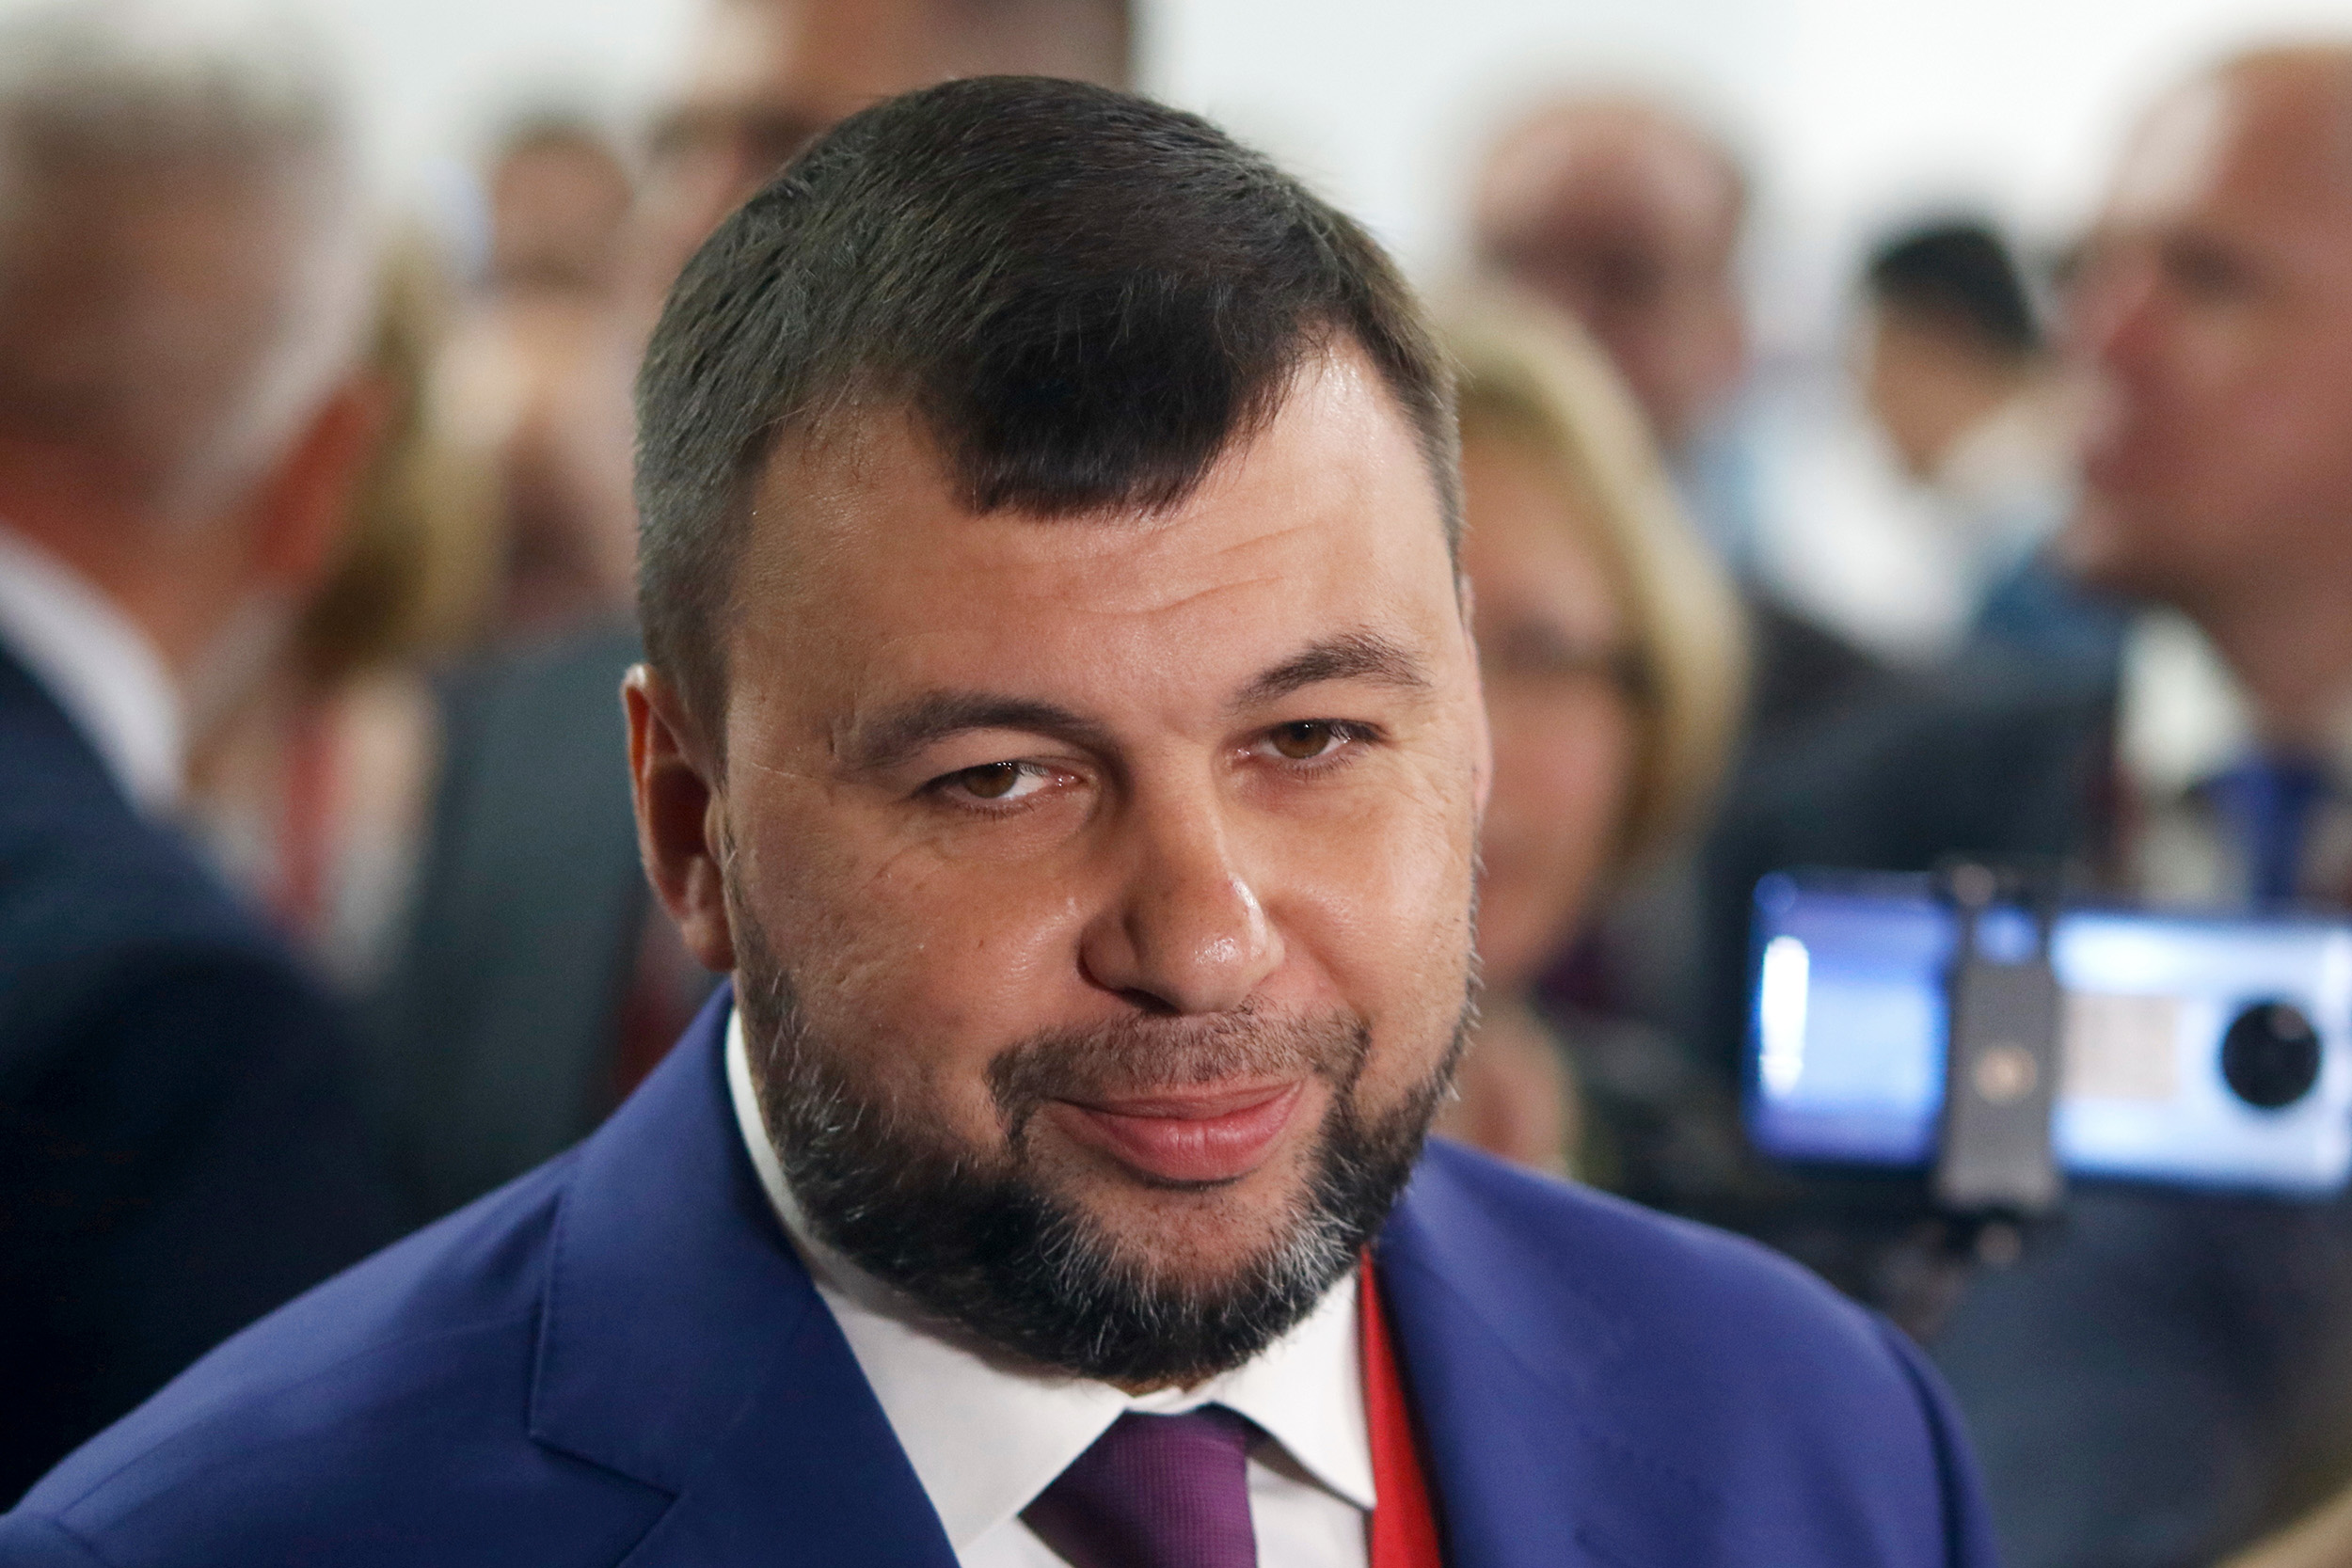 Denis Pushilin, Head of the Donetsk People's Republic, visits the St. Petersburg International Economic Forum 2022, in St. Petersburg, Russia, on June 16.